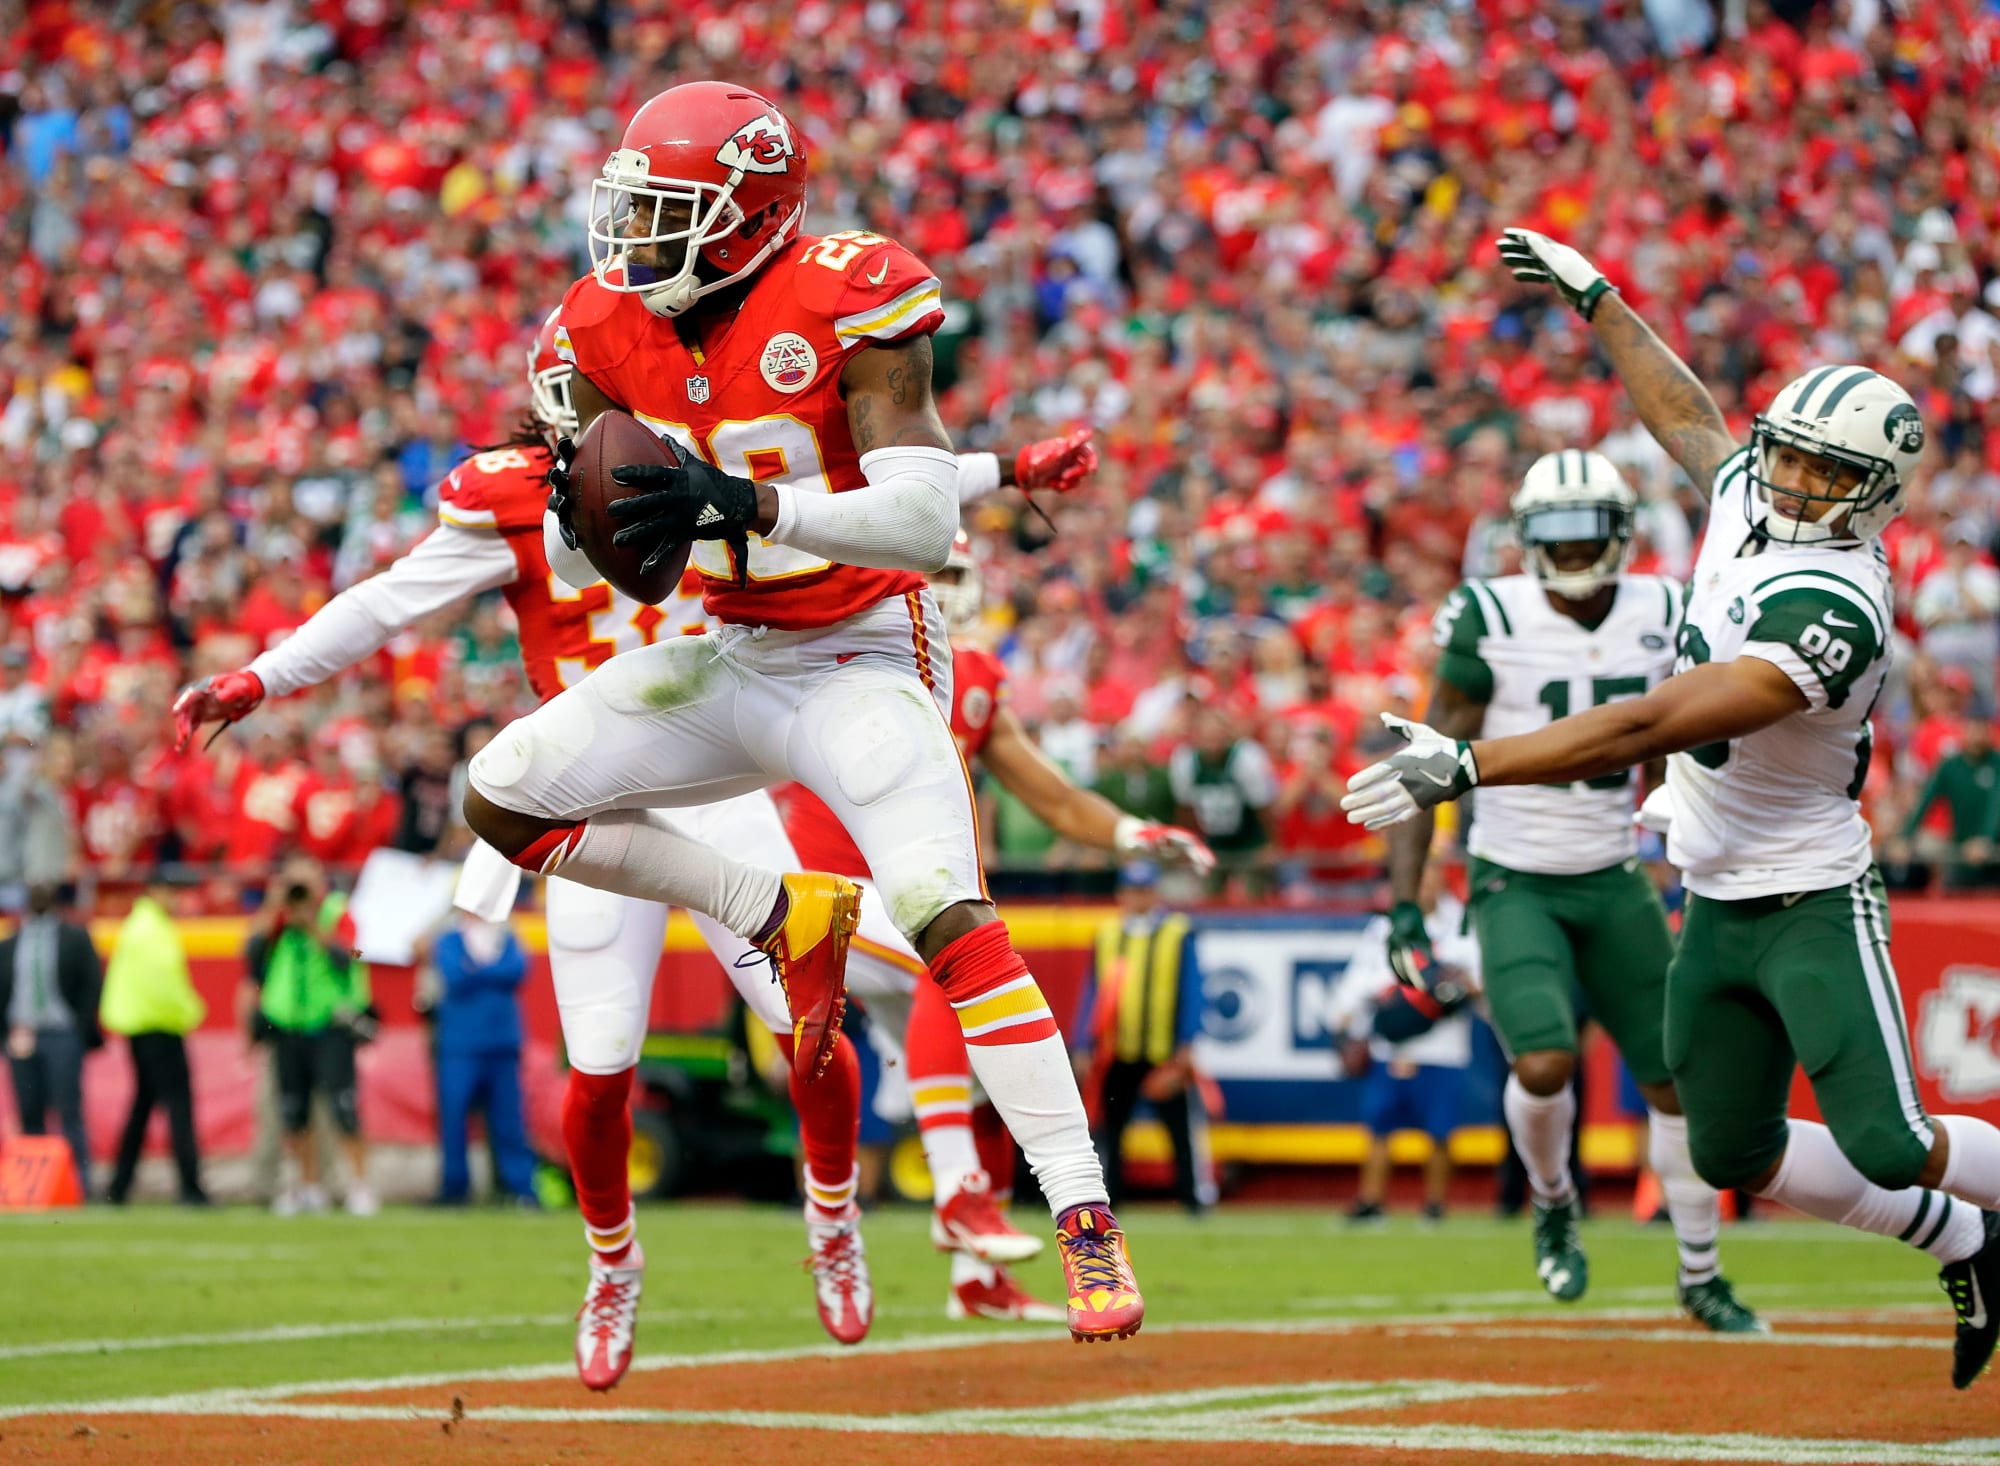 Kansas City Chiefs "turnover" a new leaf against New York Jets